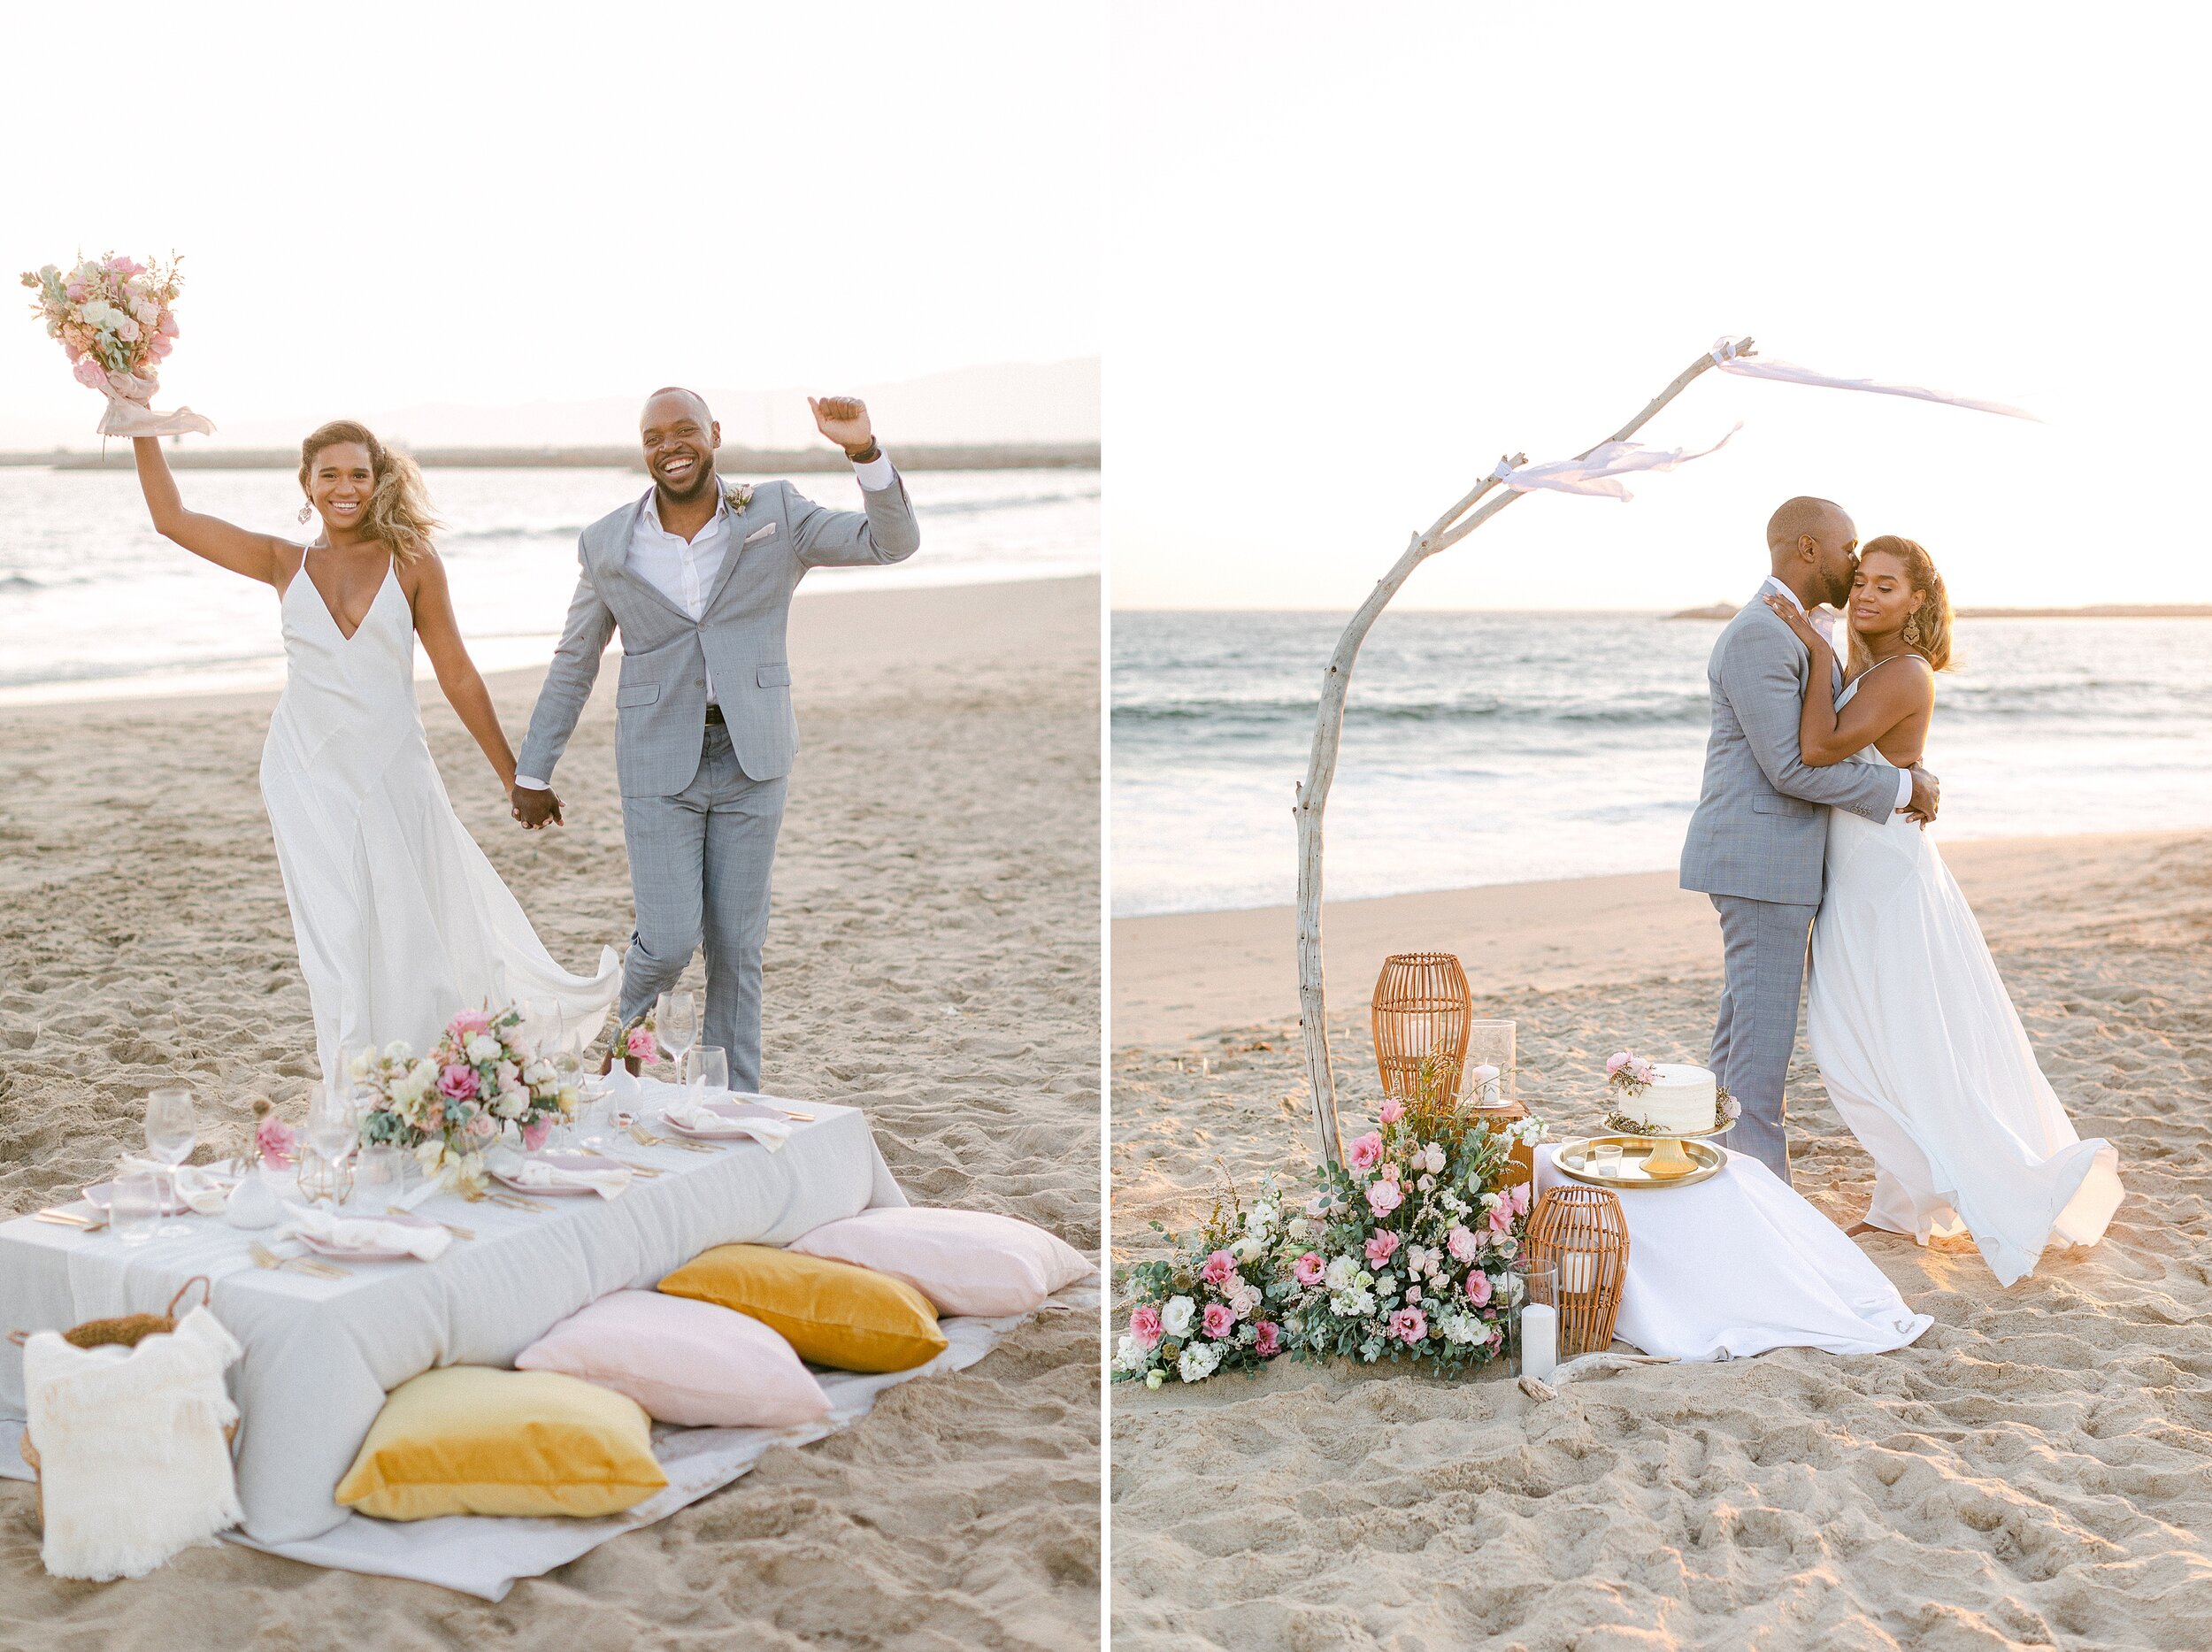 Bride and groom of color cheer following their romantic beach elopement under a driftwood arch in Marina Del Rey, CA.